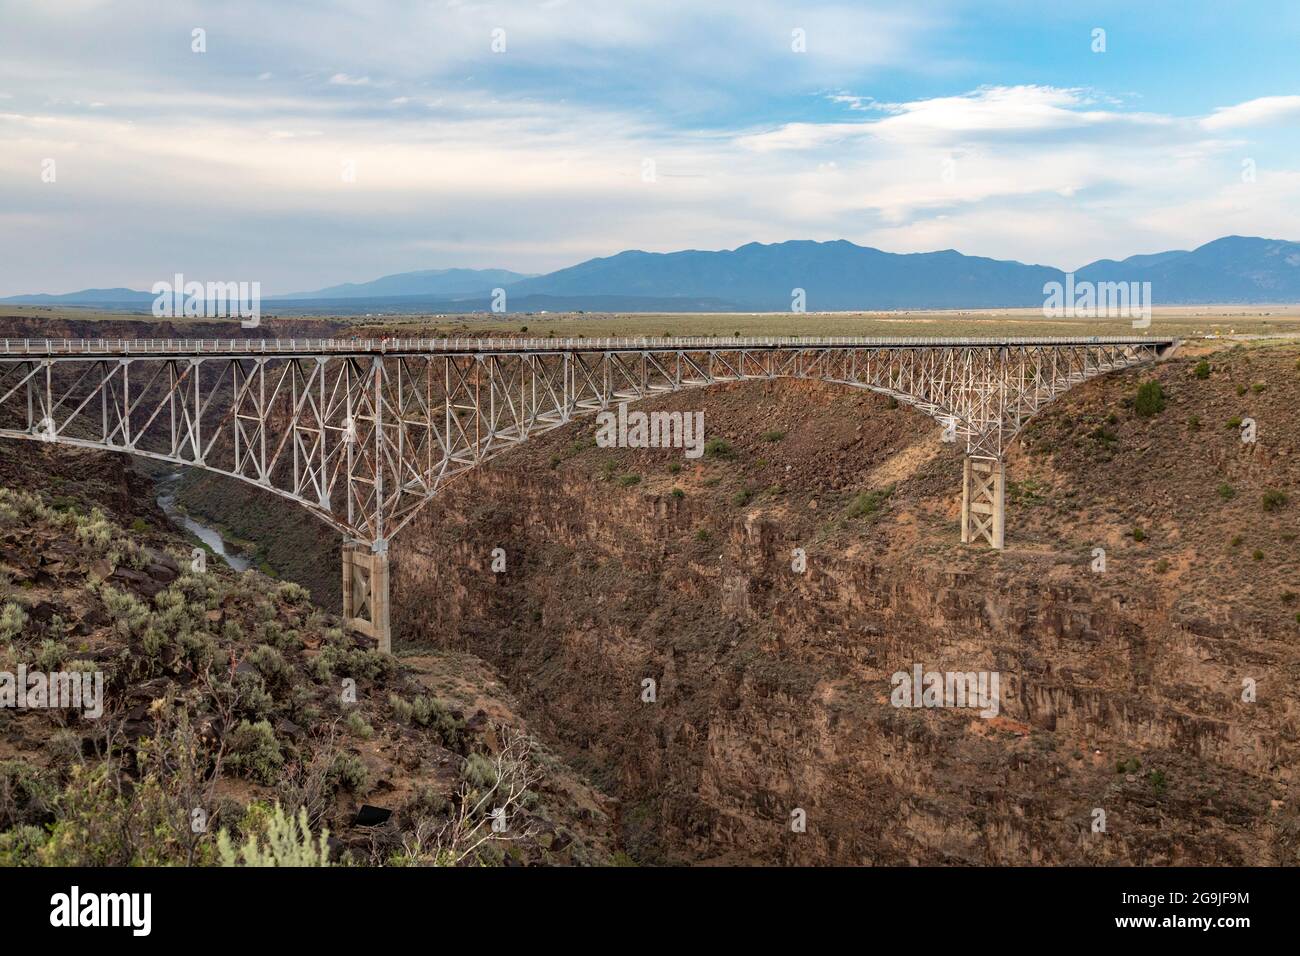 Taos, New Mexico - The Rio Grande Groge Bridge carries US Highway 64 six hundred feet above the Rio Grande. Stock Photo